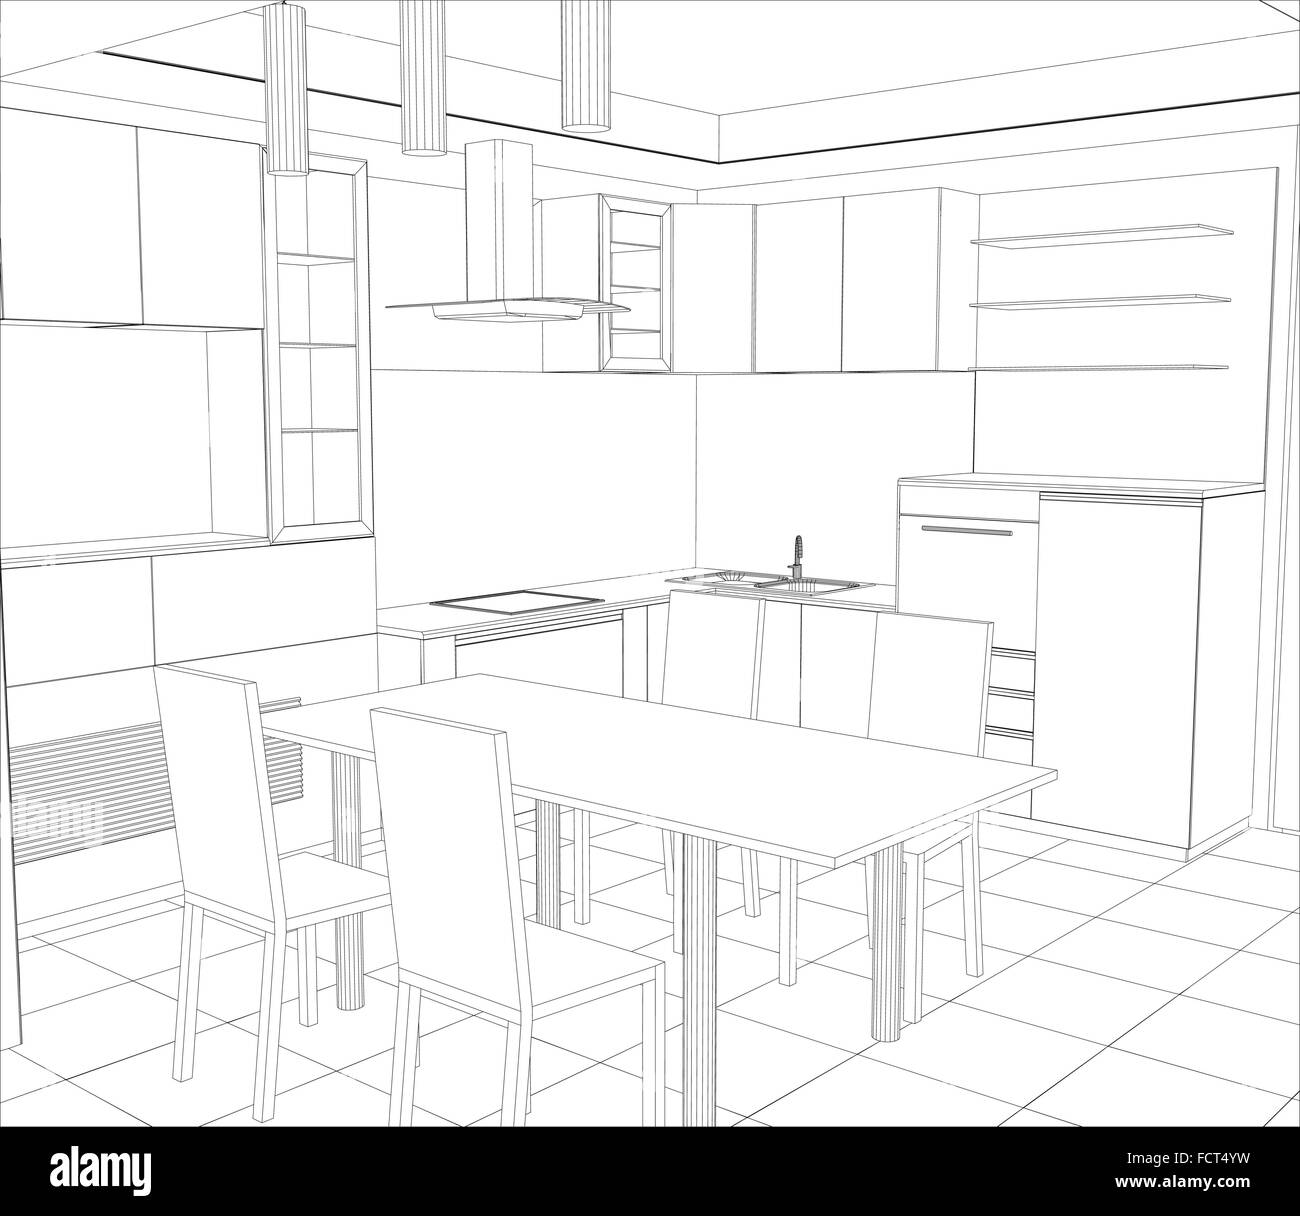 Sketch plan kitchen in the wire Stock Vector